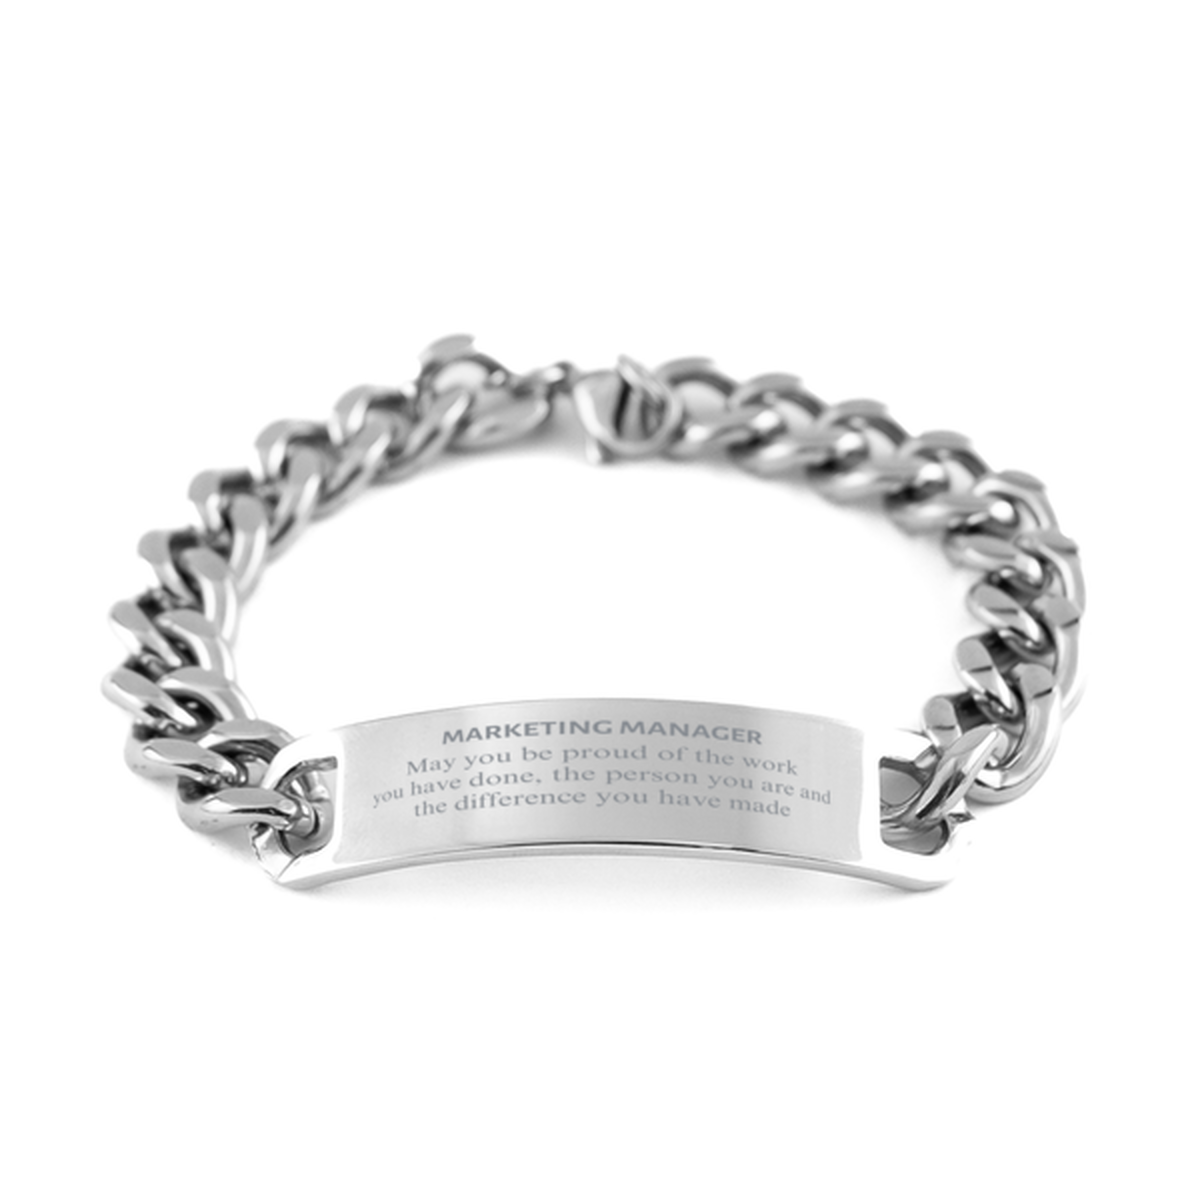 Marketing Manager May you be proud of the work you have done, Retirement Marketing Manager Cuban Chain Stainless Steel Bracelet for Colleague Appreciation Gifts Amazing for Marketing Manager